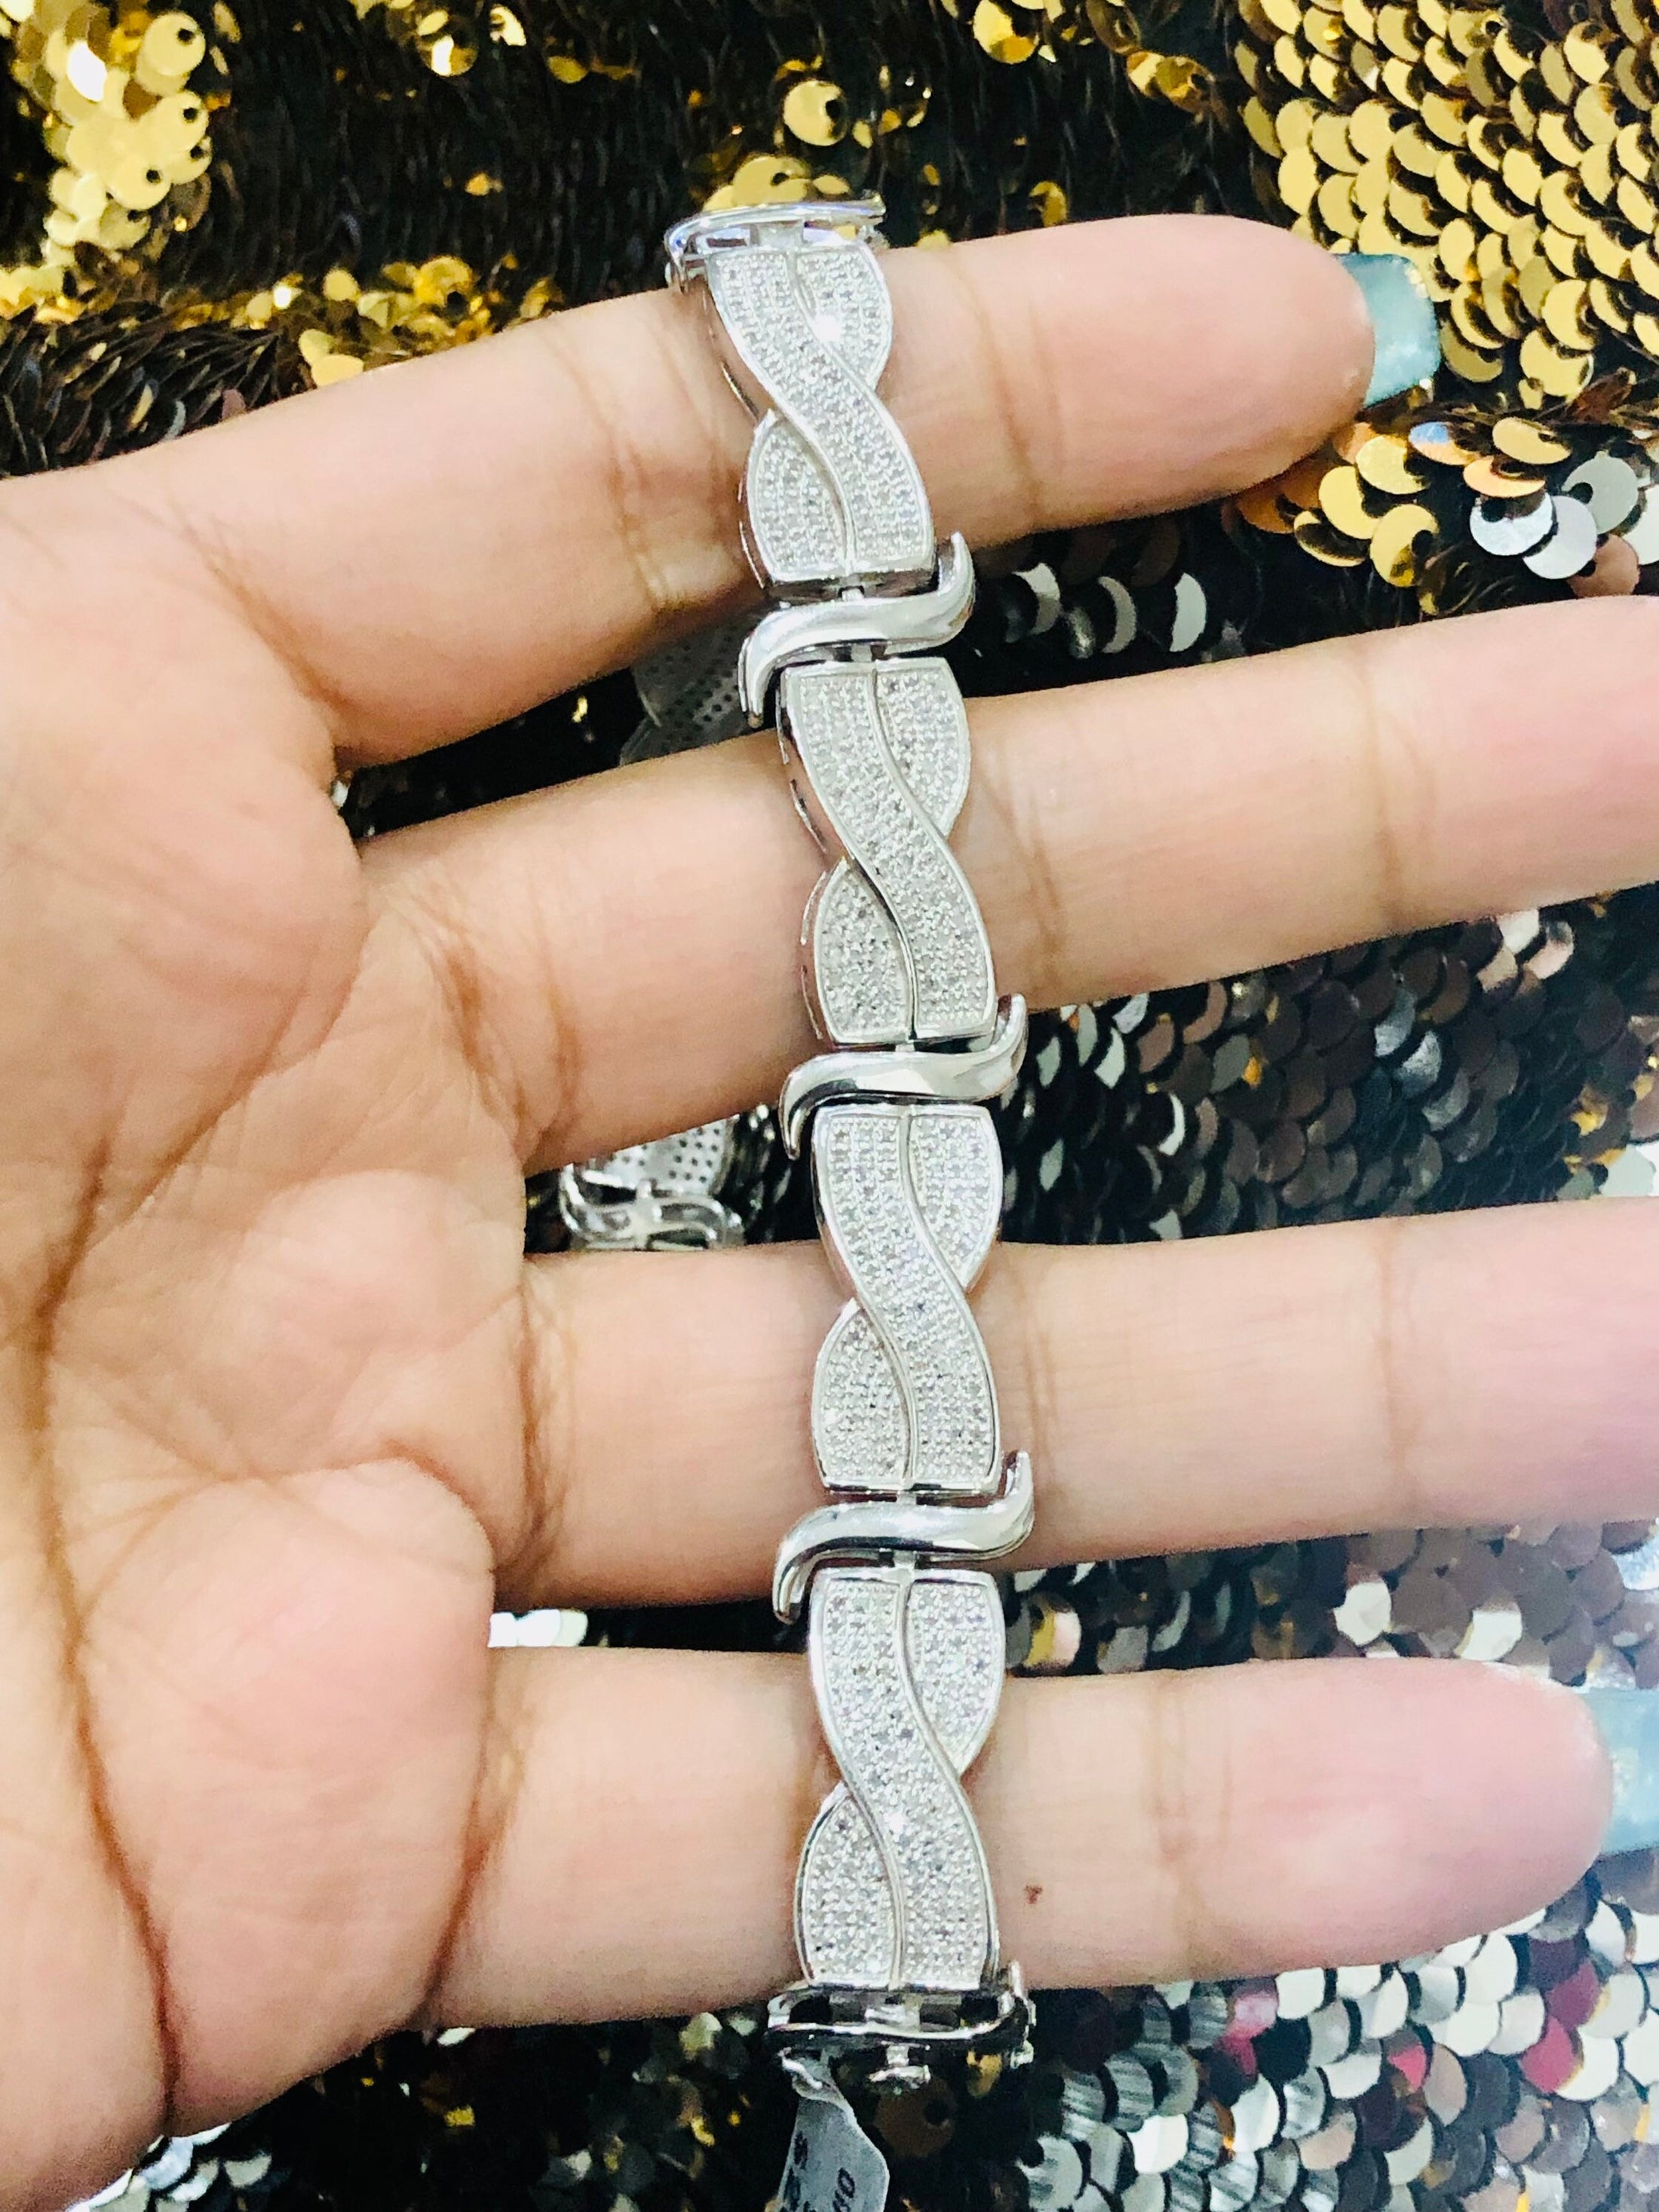 Genuine Real diamond men bracelet Only one ever made exclusive design 2 cttw Real diamonds Anniversary Birthday Christmas Gift for him Sale